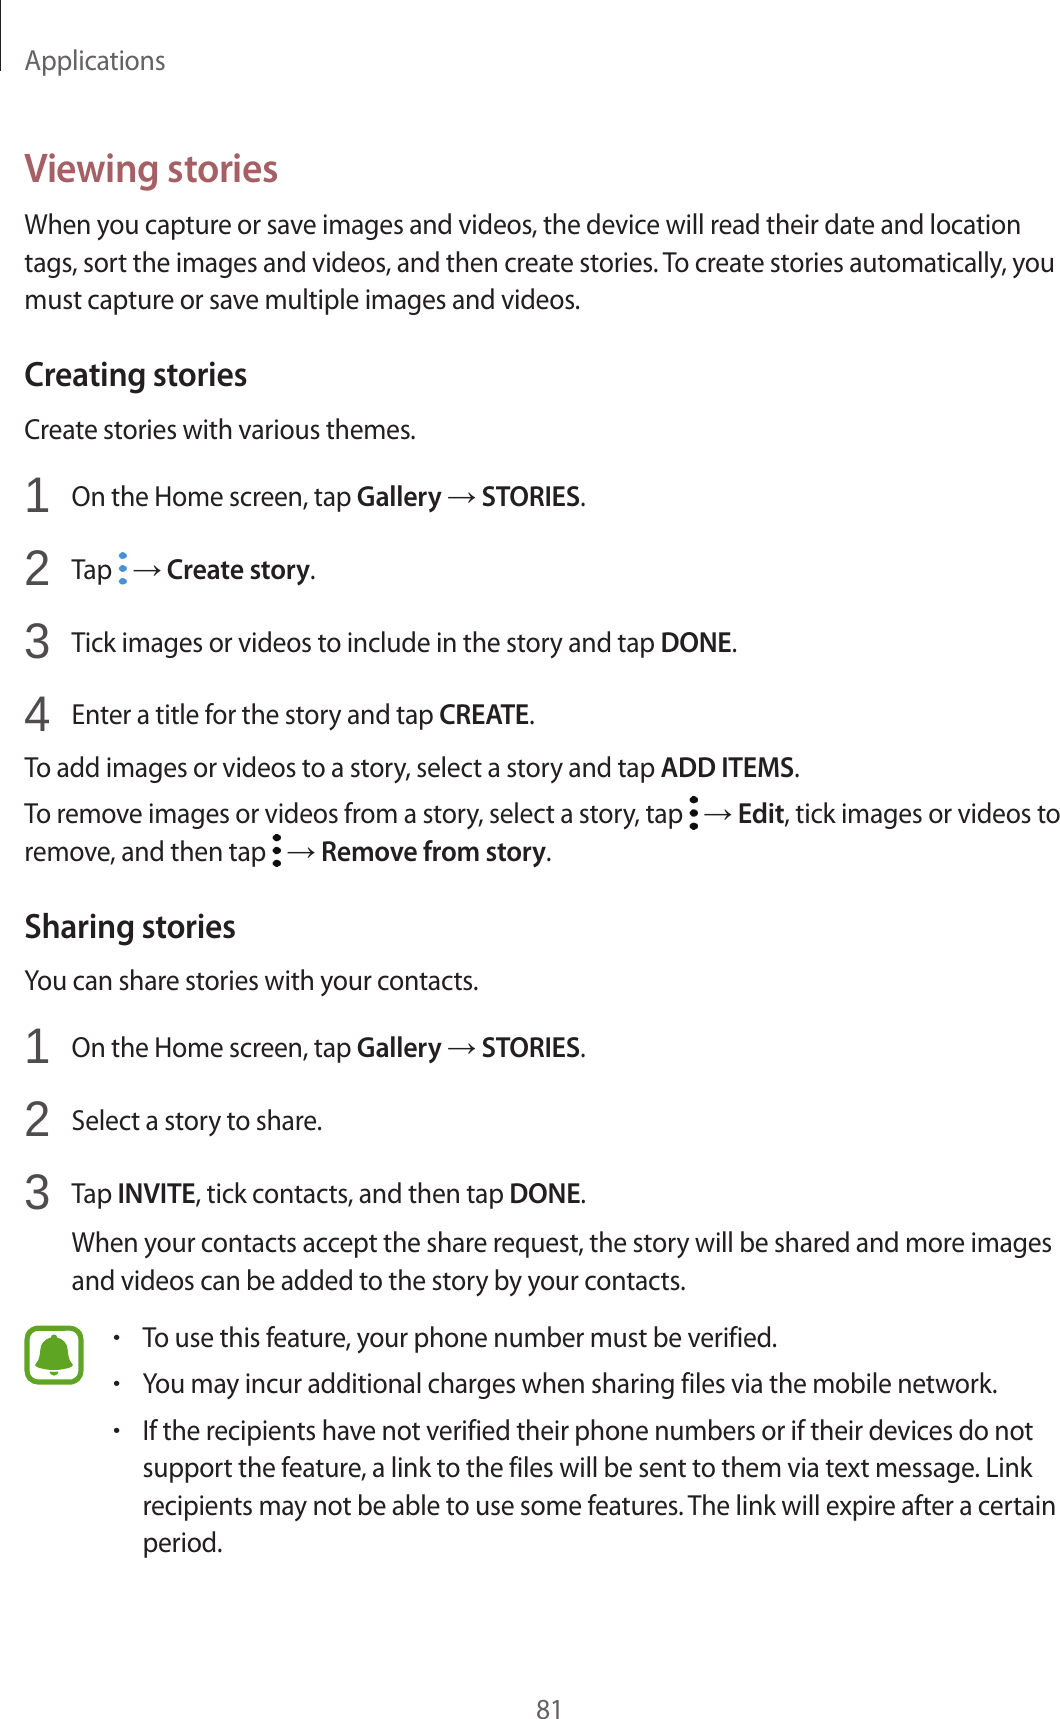 Applications81Viewing storiesWhen you capture or save images and videos, the device will read their date and location tags, sort the images and videos, and then create stories. To create stories automatically, you must capture or save multiple images and videos.Creating storiesCreate stories with various themes.1  On the Home screen, tap Gallery → STORIES.2  Tap   → Create story.3  Tick images or videos to include in the story and tap DONE.4  Enter a title for the story and tap CREATE.To add images or videos to a story, select a story and tap ADD ITEMS.To remove images or videos from a story, select a story, tap   → Edit, tick images or videos to remove, and then tap   → Remove from story.Sharing storiesYou can share stories with your contacts.1  On the Home screen, tap Gallery → STORIES.2  Select a story to share.3  Tap INVITE, tick contacts, and then tap DONE.When your contacts accept the share request, the story will be shared and more images and videos can be added to the story by your contacts.•To use this feature, your phone number must be verified.•You may incur additional charges when sharing files via the mobile network.•If the recipients have not verified their phone numbers or if their devices do not support the feature, a link to the files will be sent to them via text message. Link recipients may not be able to use some features. The link will expire after a certain period.